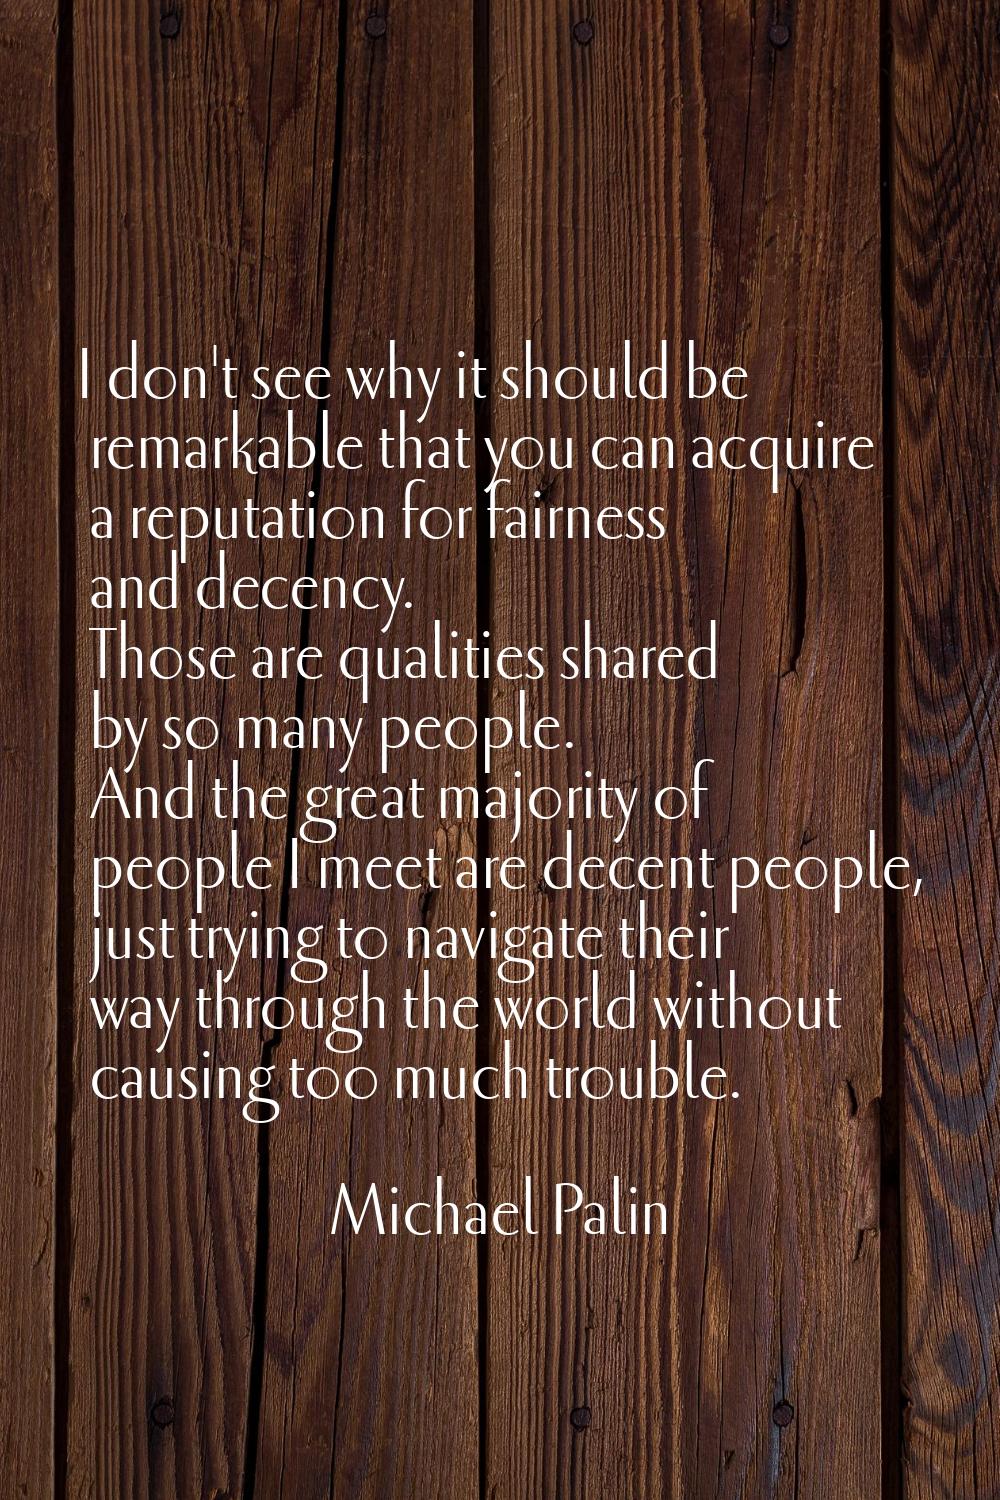 I don't see why it should be remarkable that you can acquire a reputation for fairness and decency.